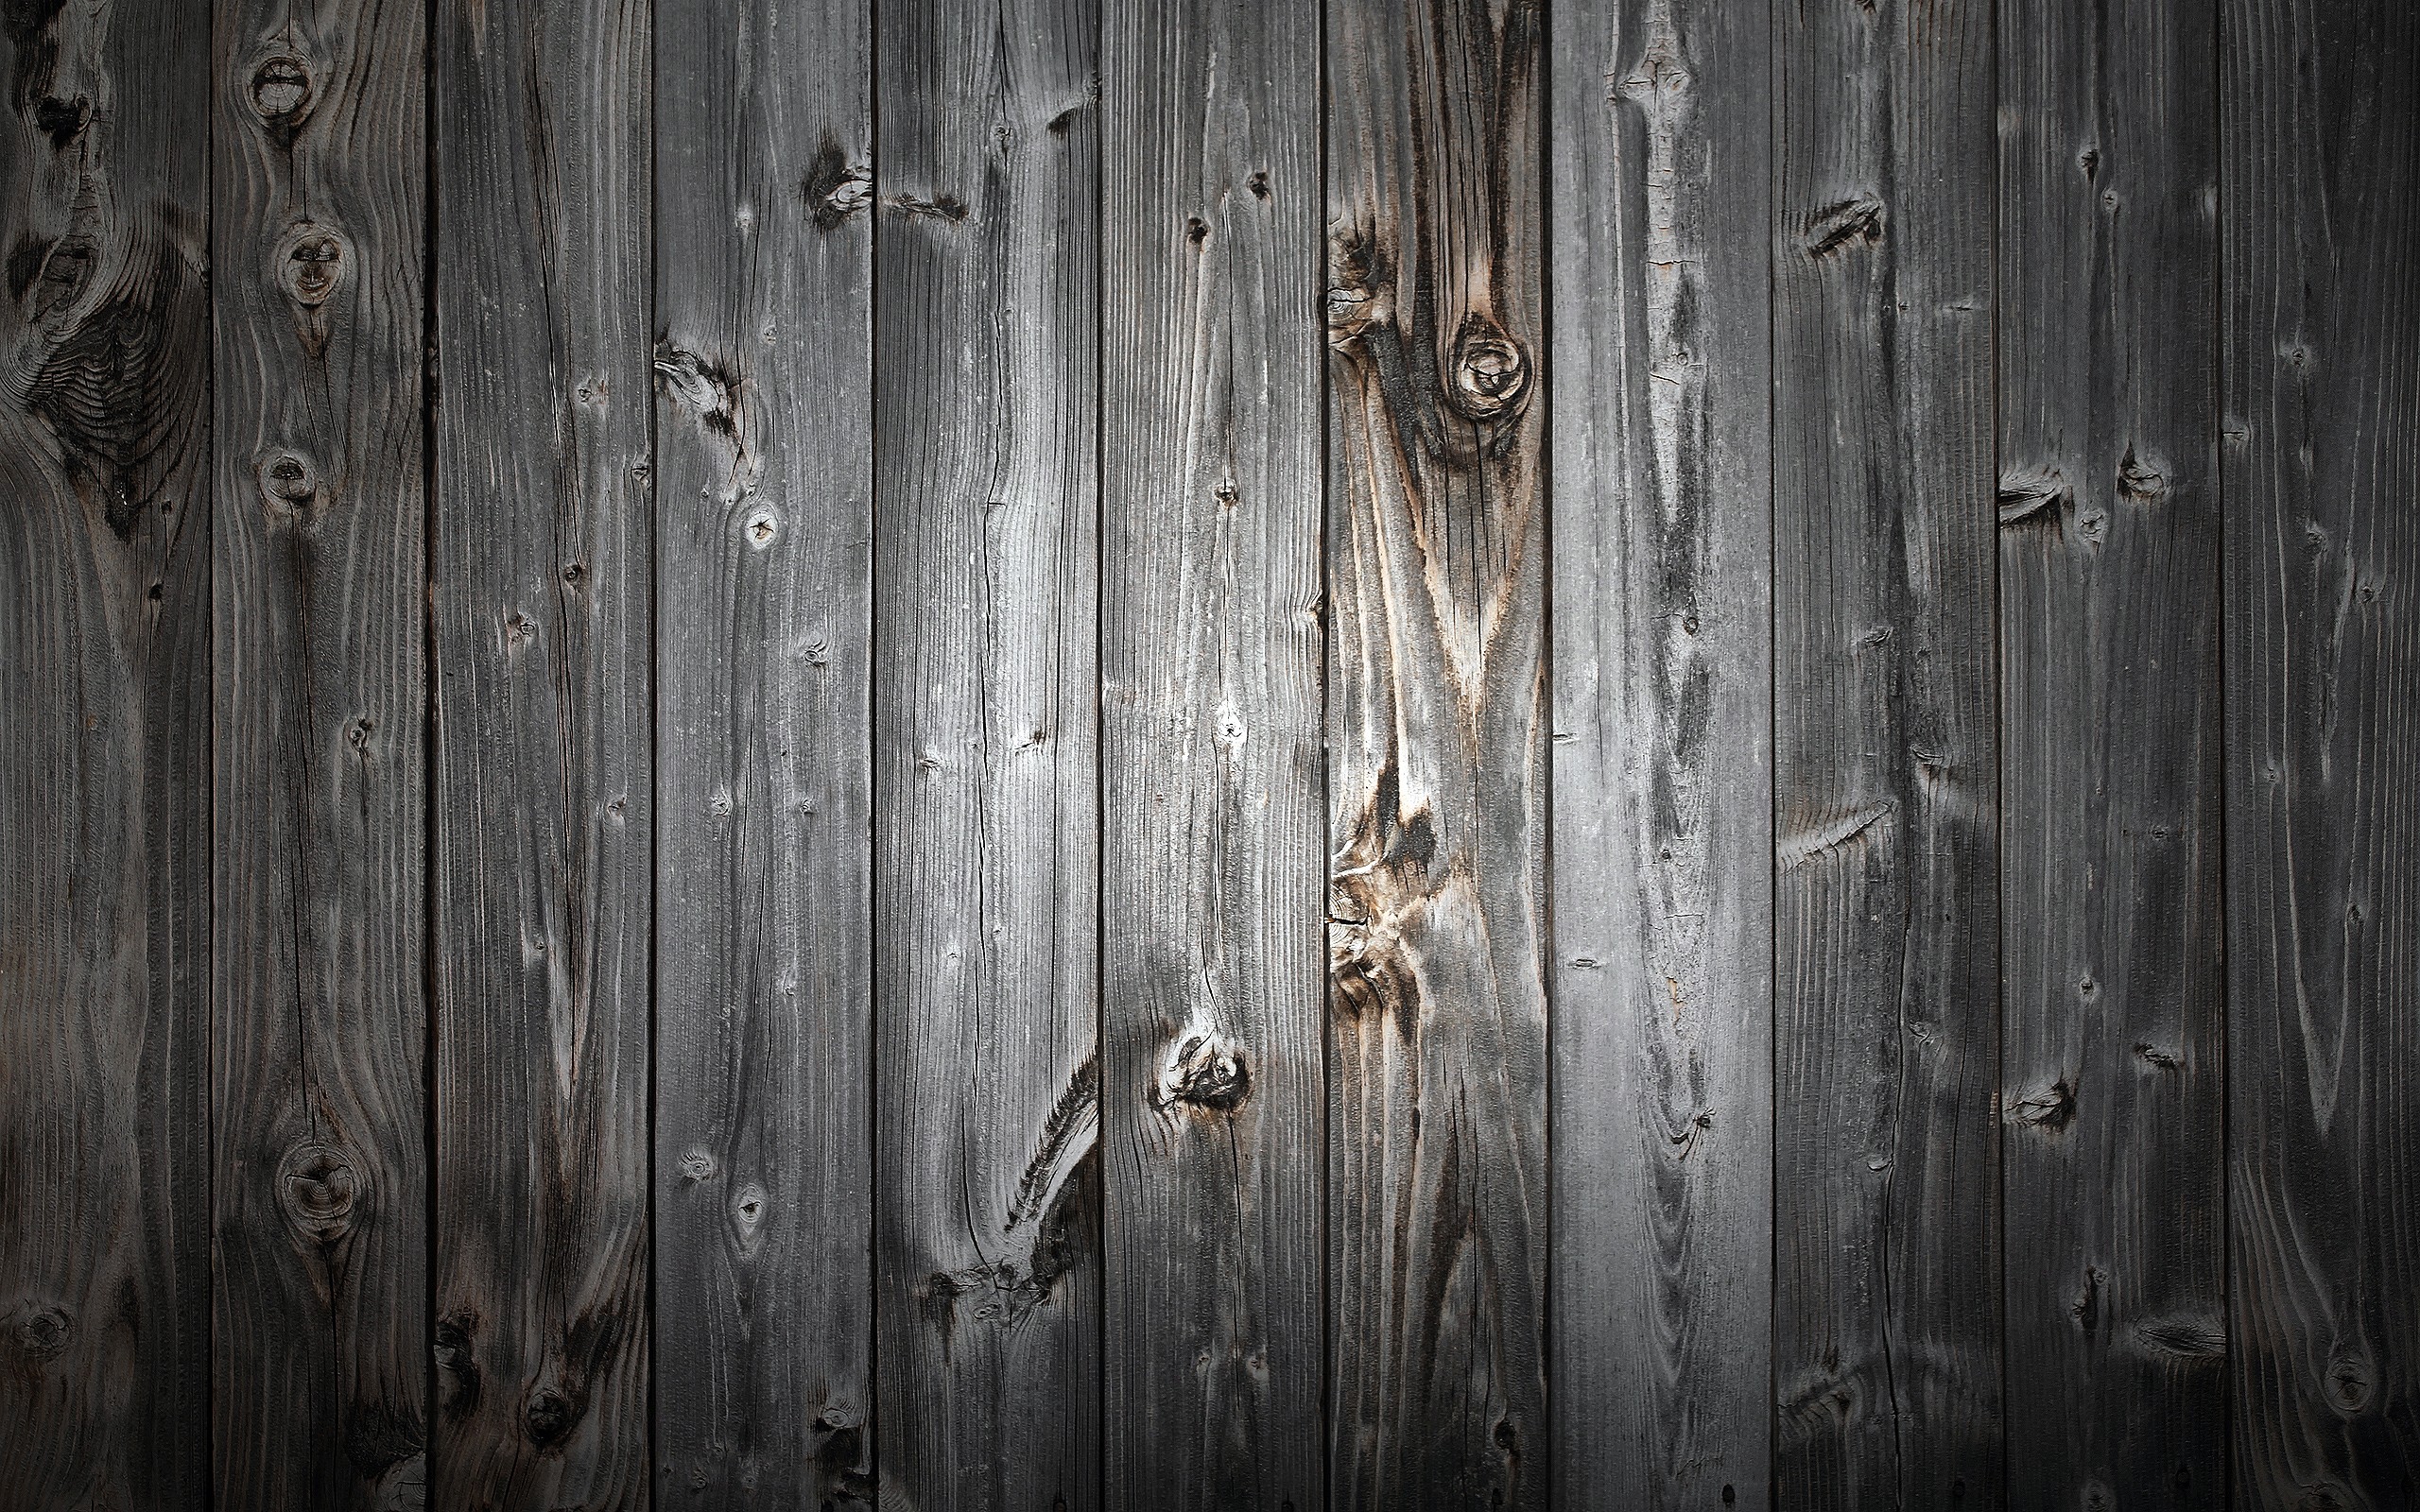 30 Rustic Backgrounds Download Free Beautiful Hd Wallpapers Images, Photos, Reviews